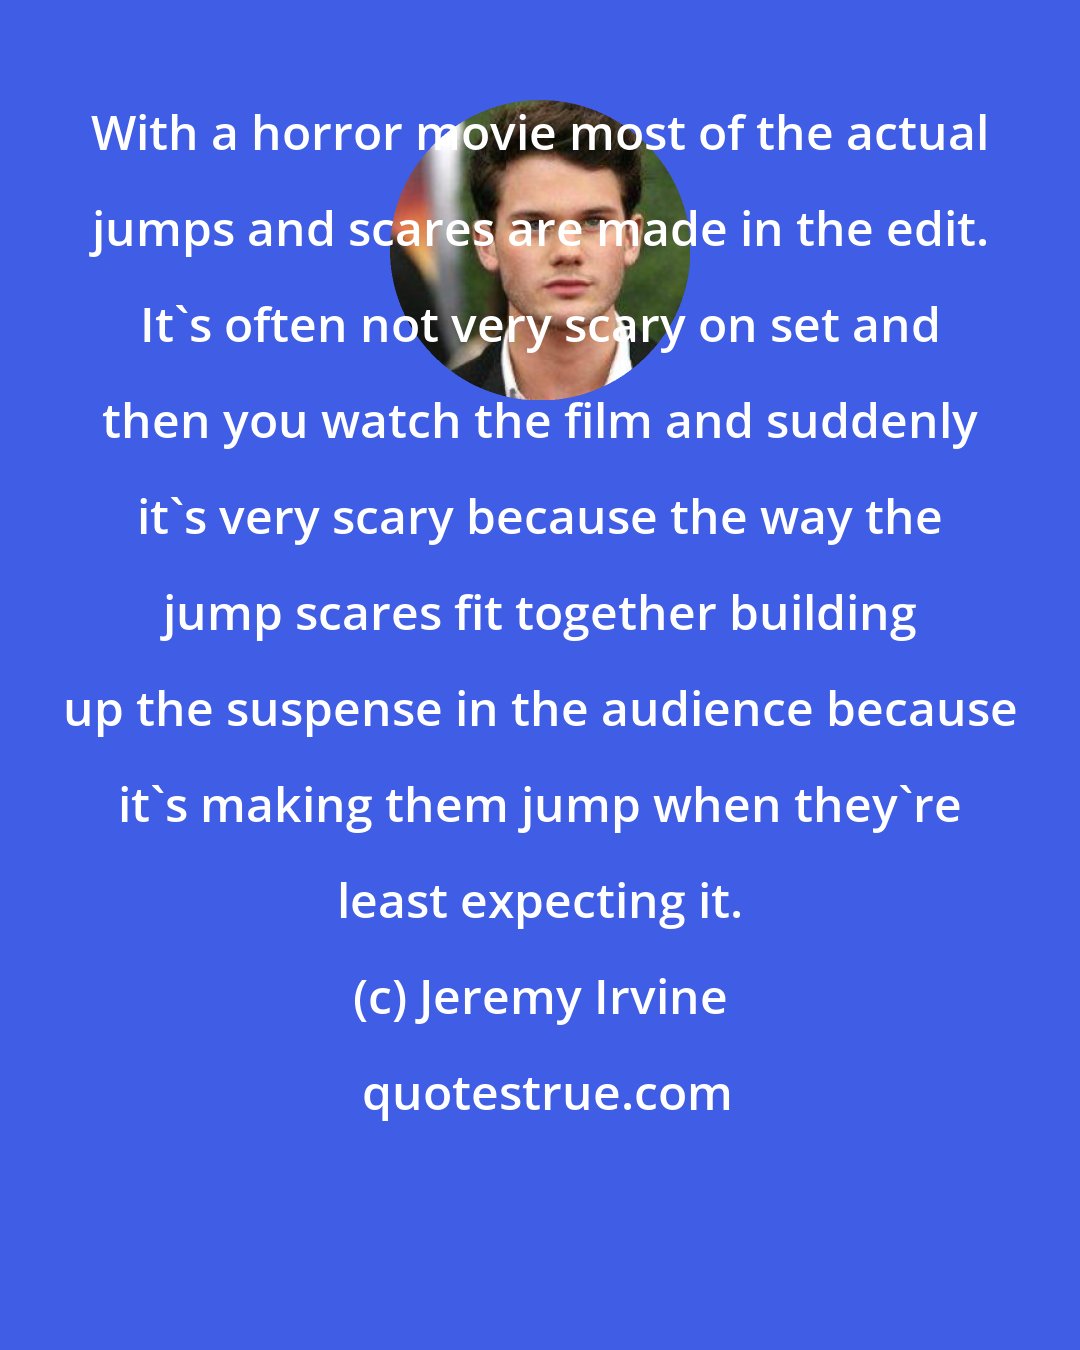 Jeremy Irvine: With a horror movie most of the actual jumps and scares are made in the edit. It's often not very scary on set and then you watch the film and suddenly it's very scary because the way the jump scares fit together building up the suspense in the audience because it's making them jump when they're least expecting it.